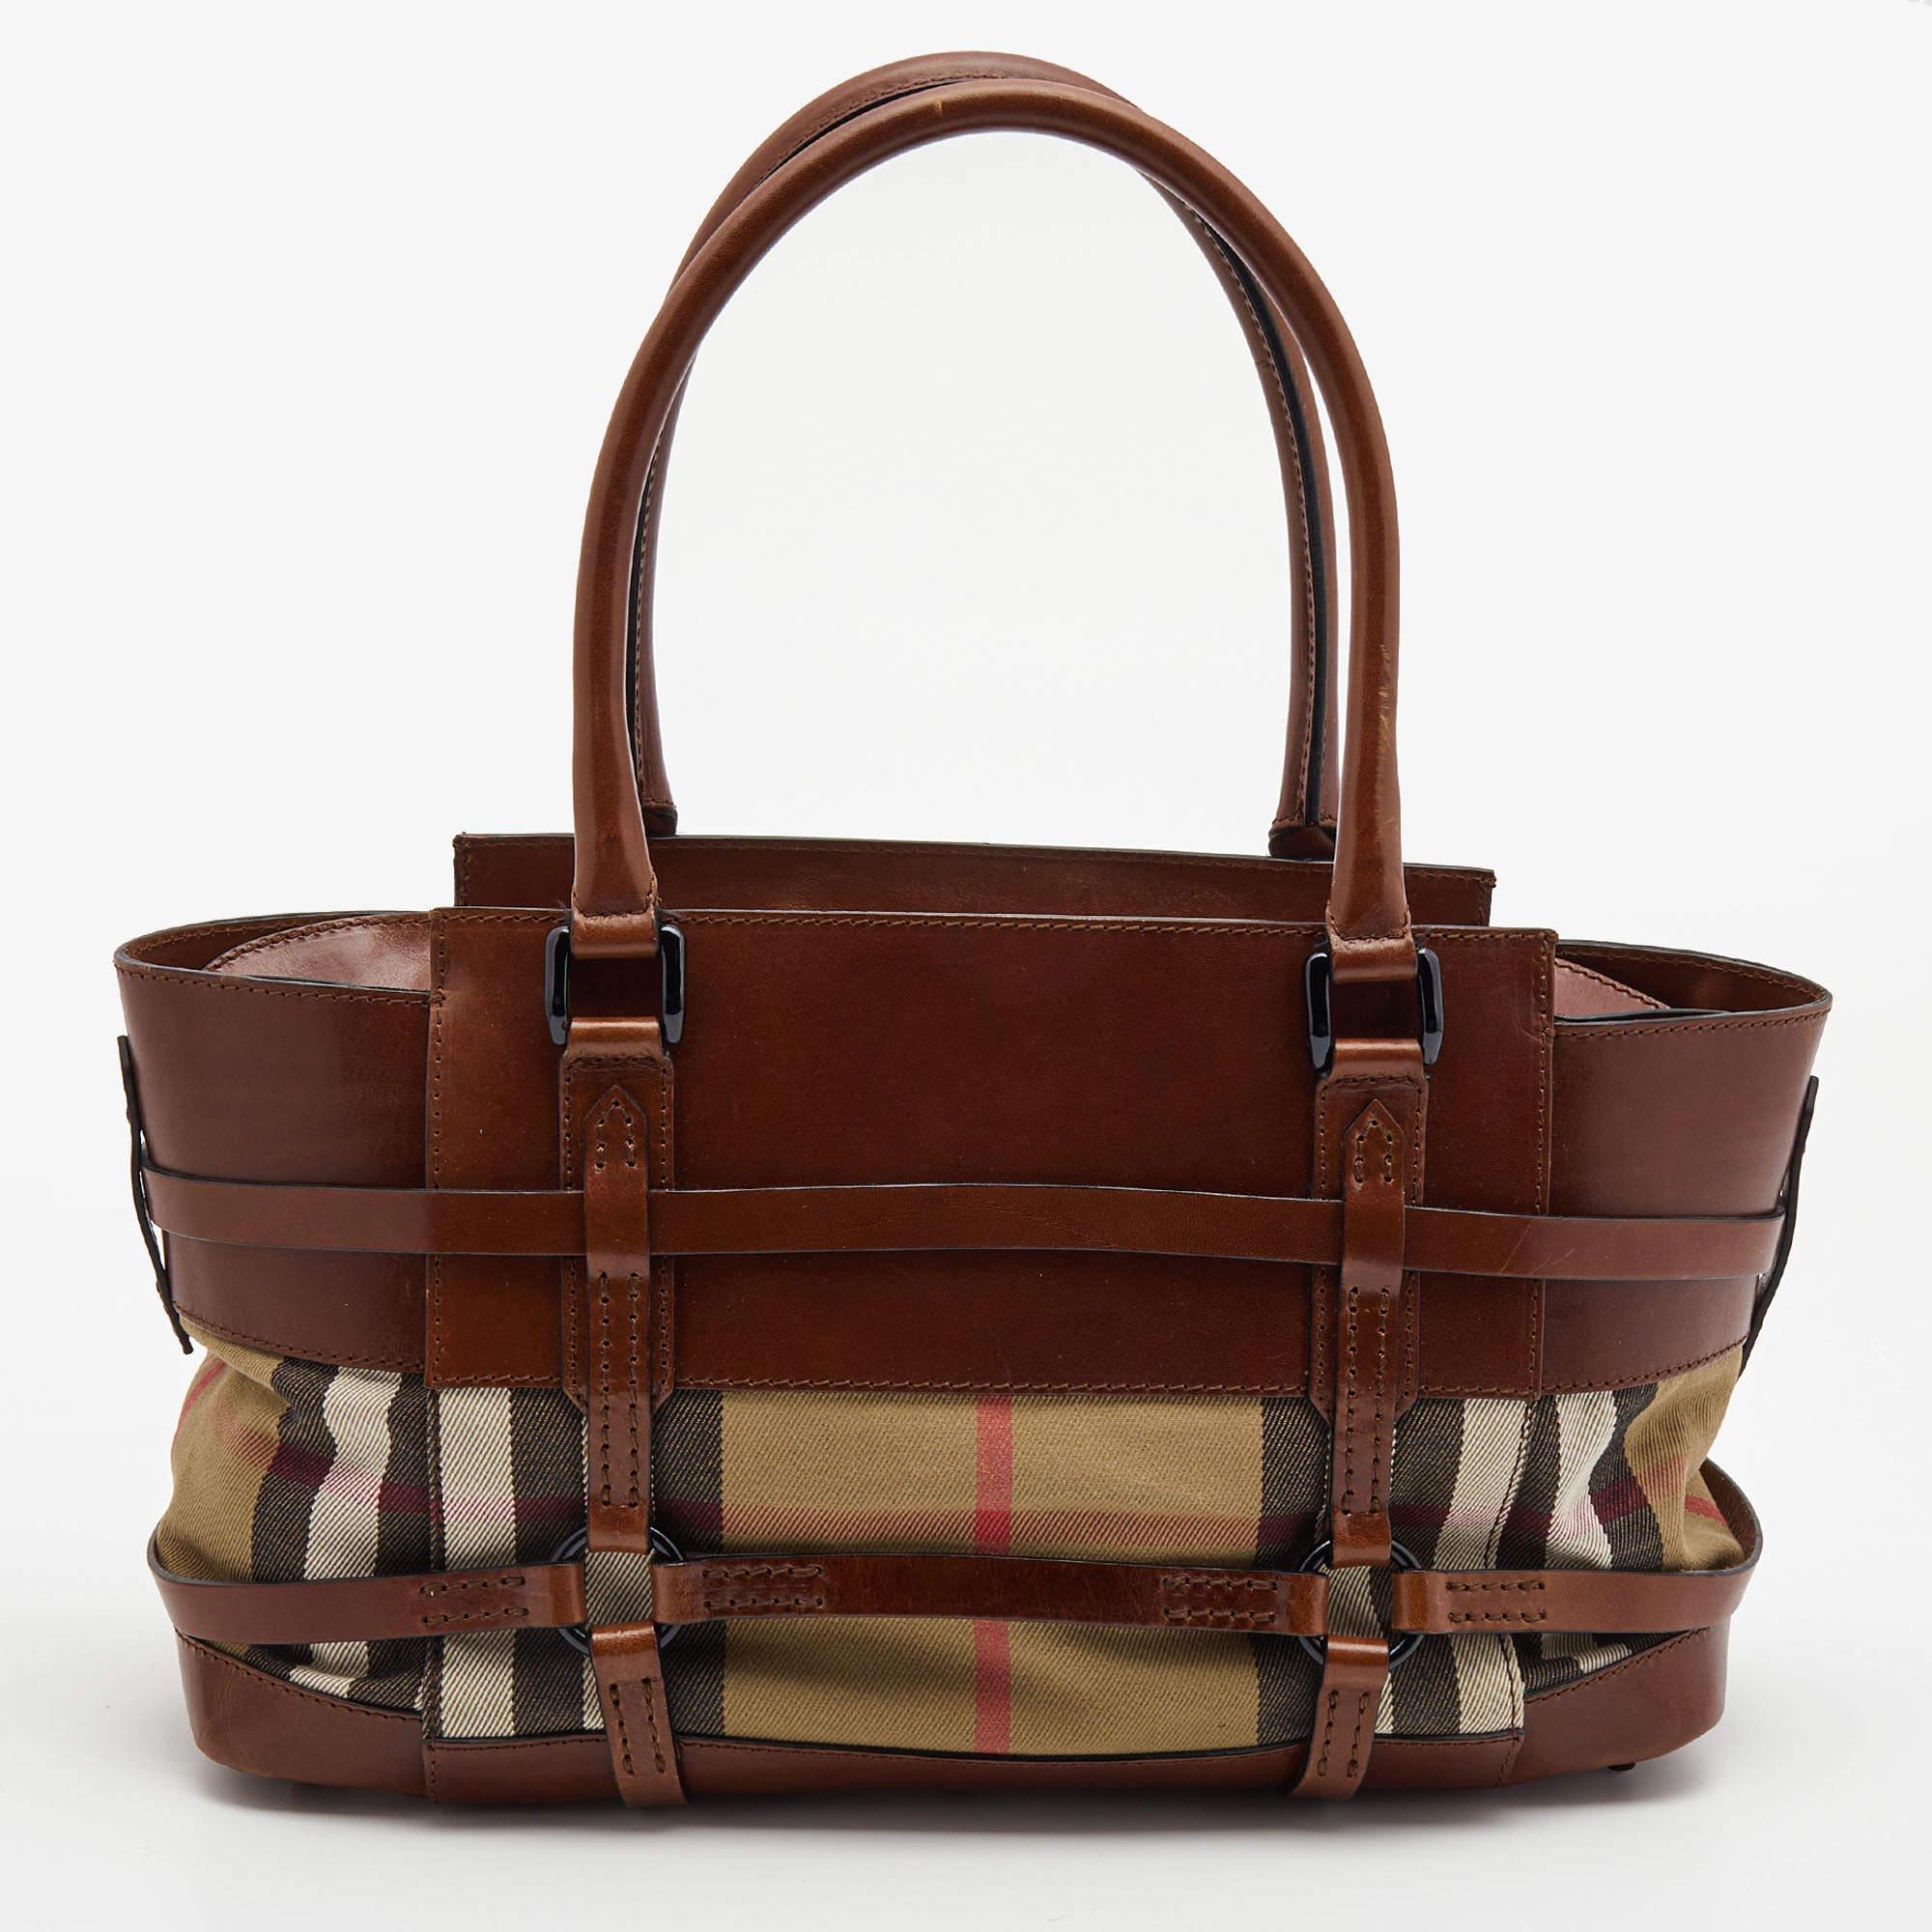 The simple silhouette and the use of durable materials for the exterior bring out the appeal of this Burberry satchel for women. It features comfortable handles and a well-lined interior.

